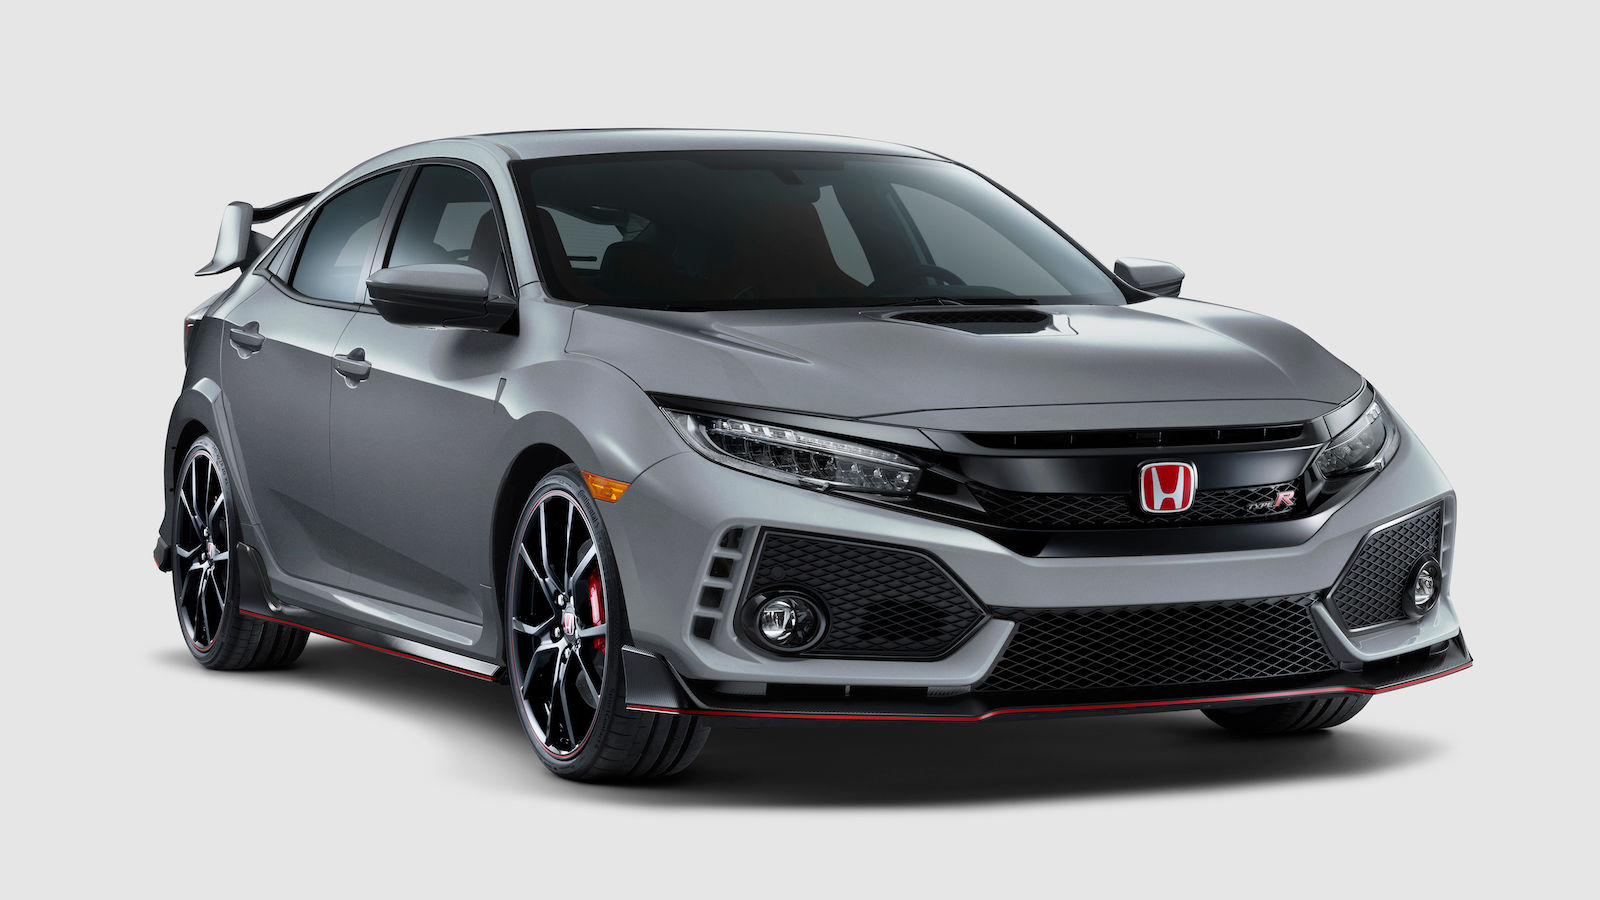 Illustration for article titled The Civic Type R now comes in Sonic Grey and has a volume knob